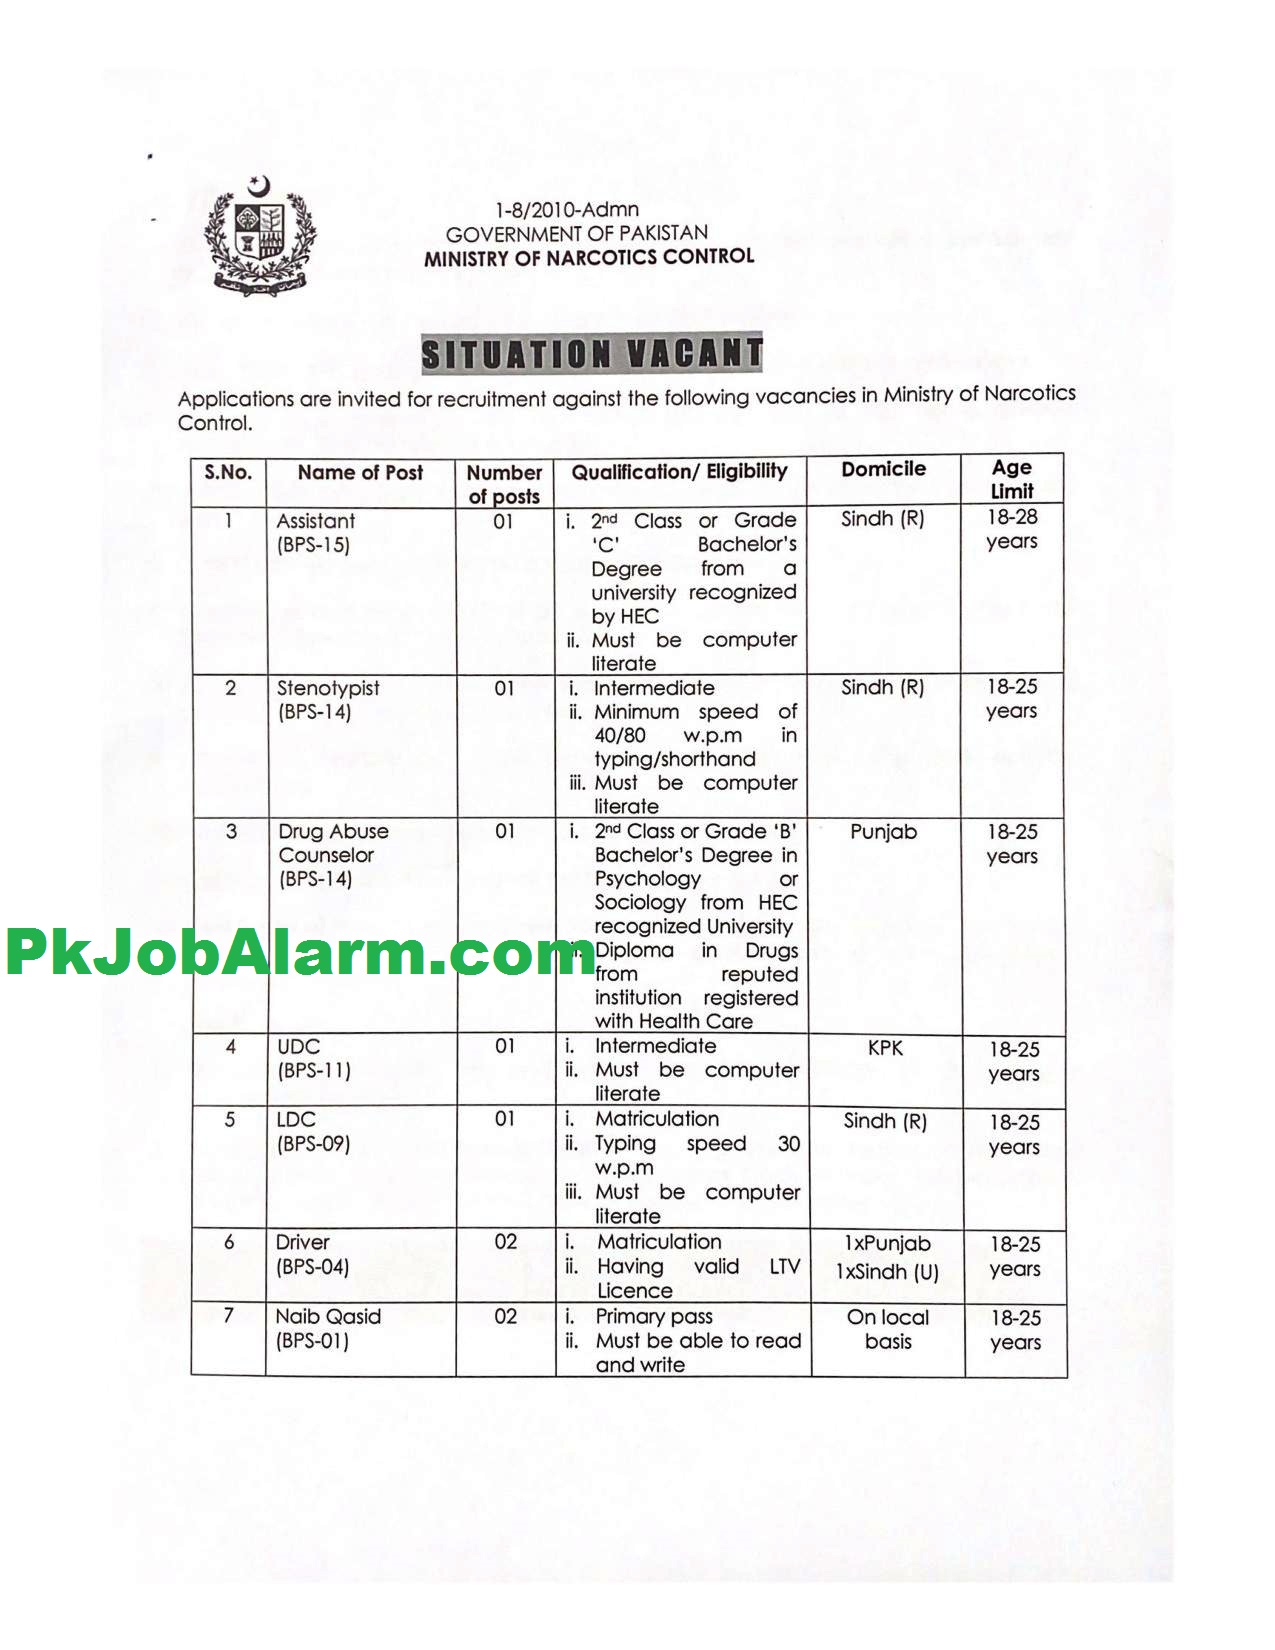 anti narcotics jobs 2022 apply online jobs anf 2022 || Ministry of Narcotics Control Jobs 2022